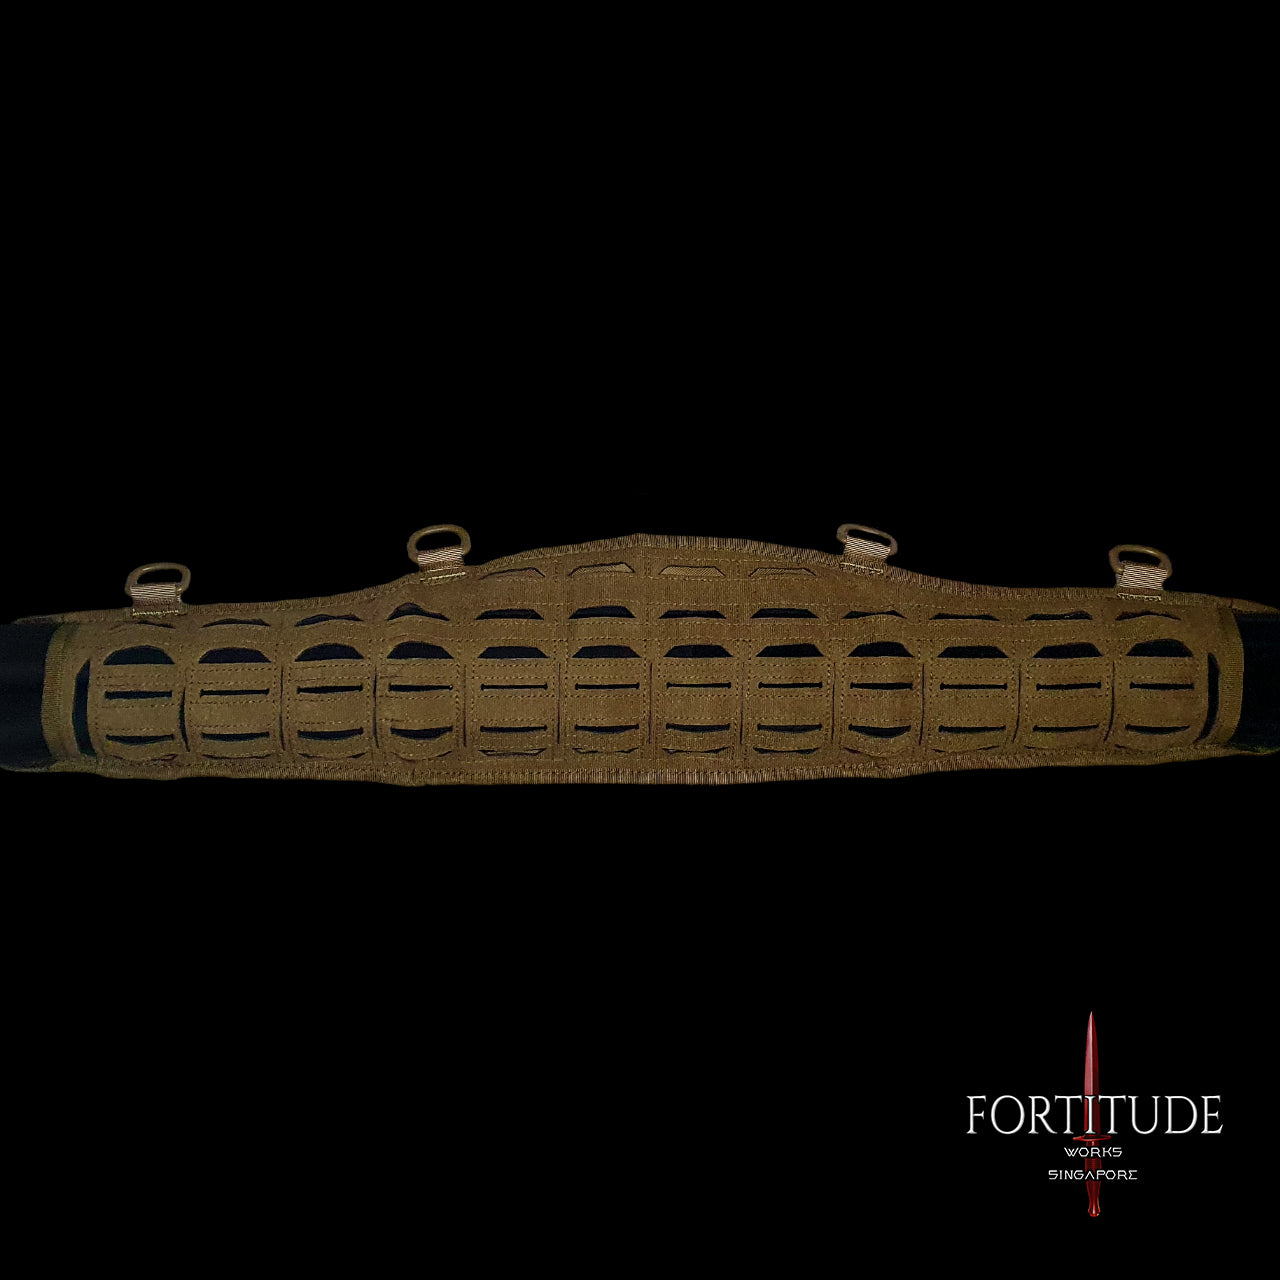 MJOLNIR WEIGHTED BELT 5KG (MWB) - FORTITUDE WORKS SINGAPORE